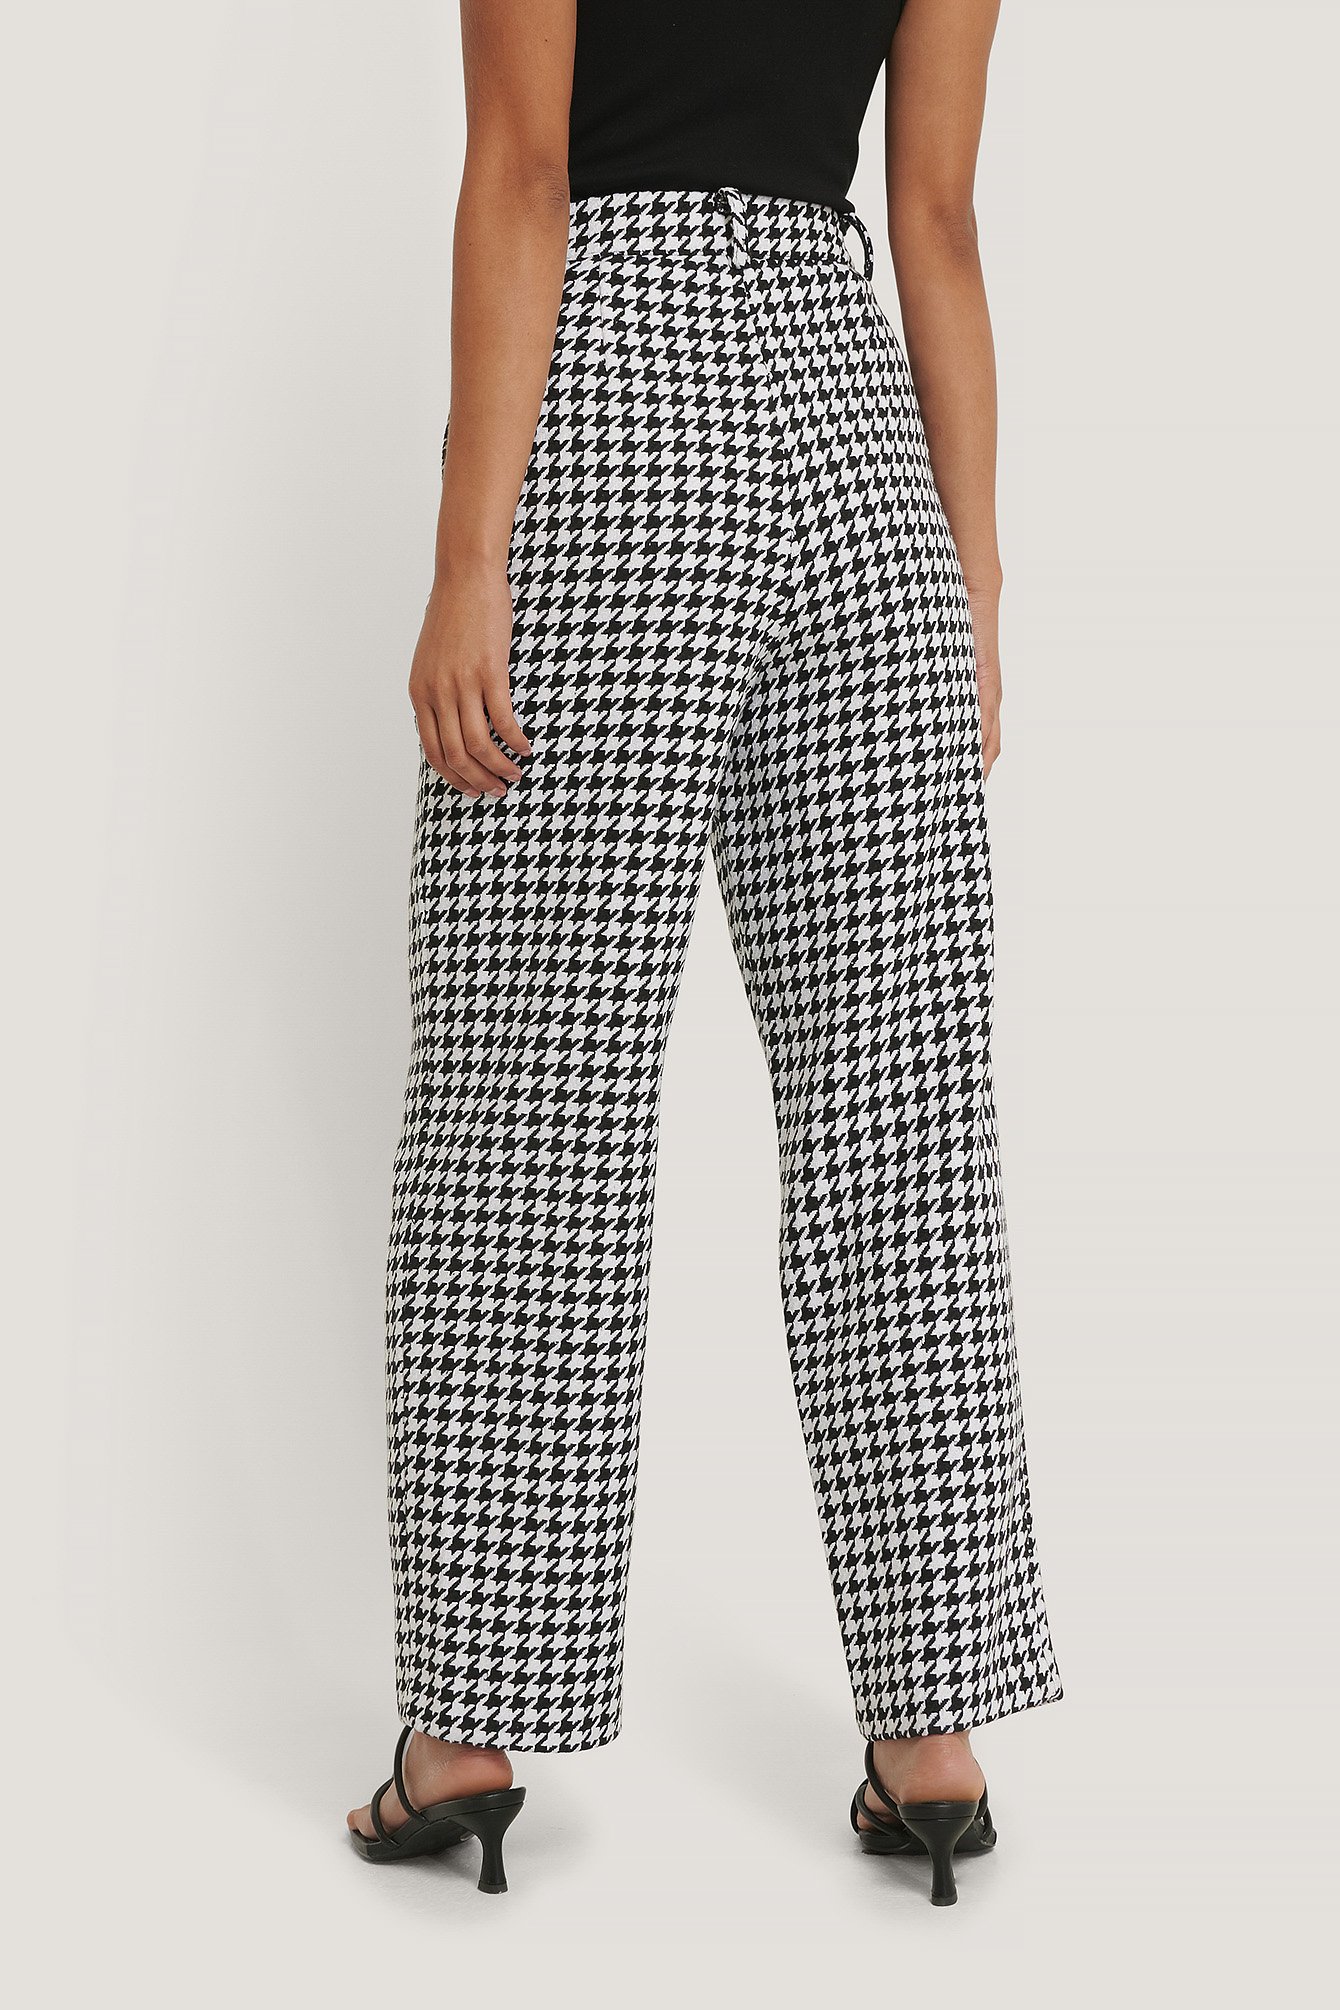 Black/White Wide Leg Houndstooth Pants